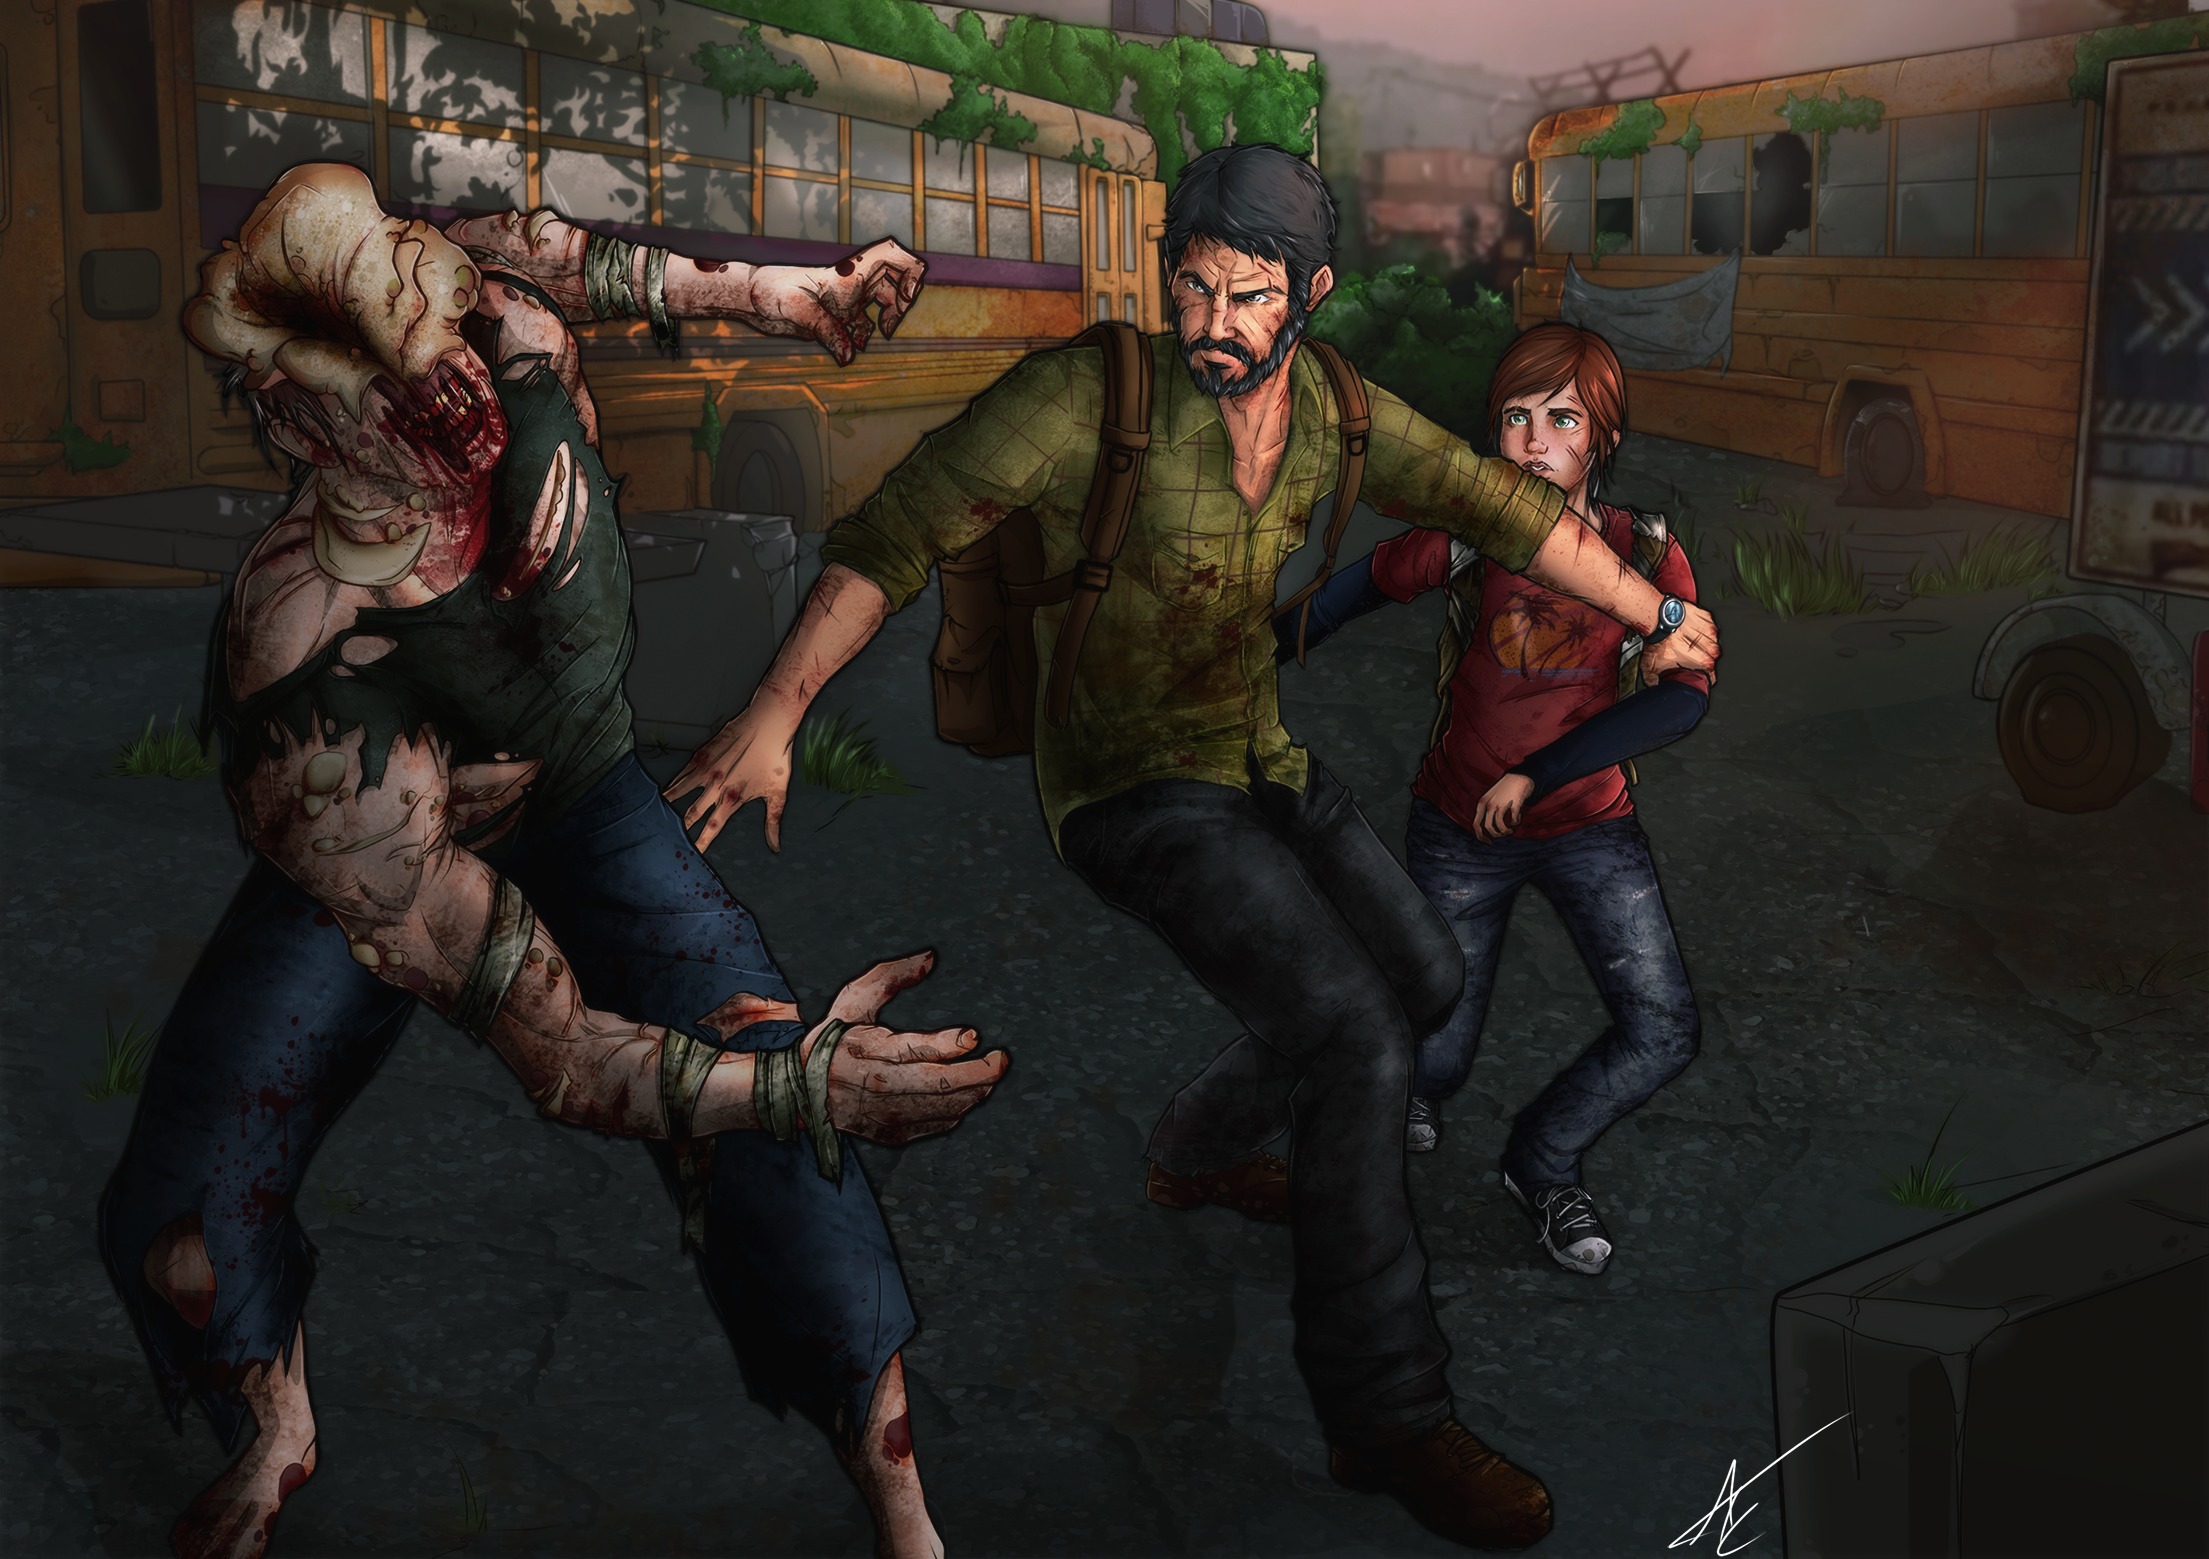 HD desktop wallpaper: Video Game, The Last Of Us, Ellie (The Last Of Us),  Joel (The Last Of Us) download free picture #1506998